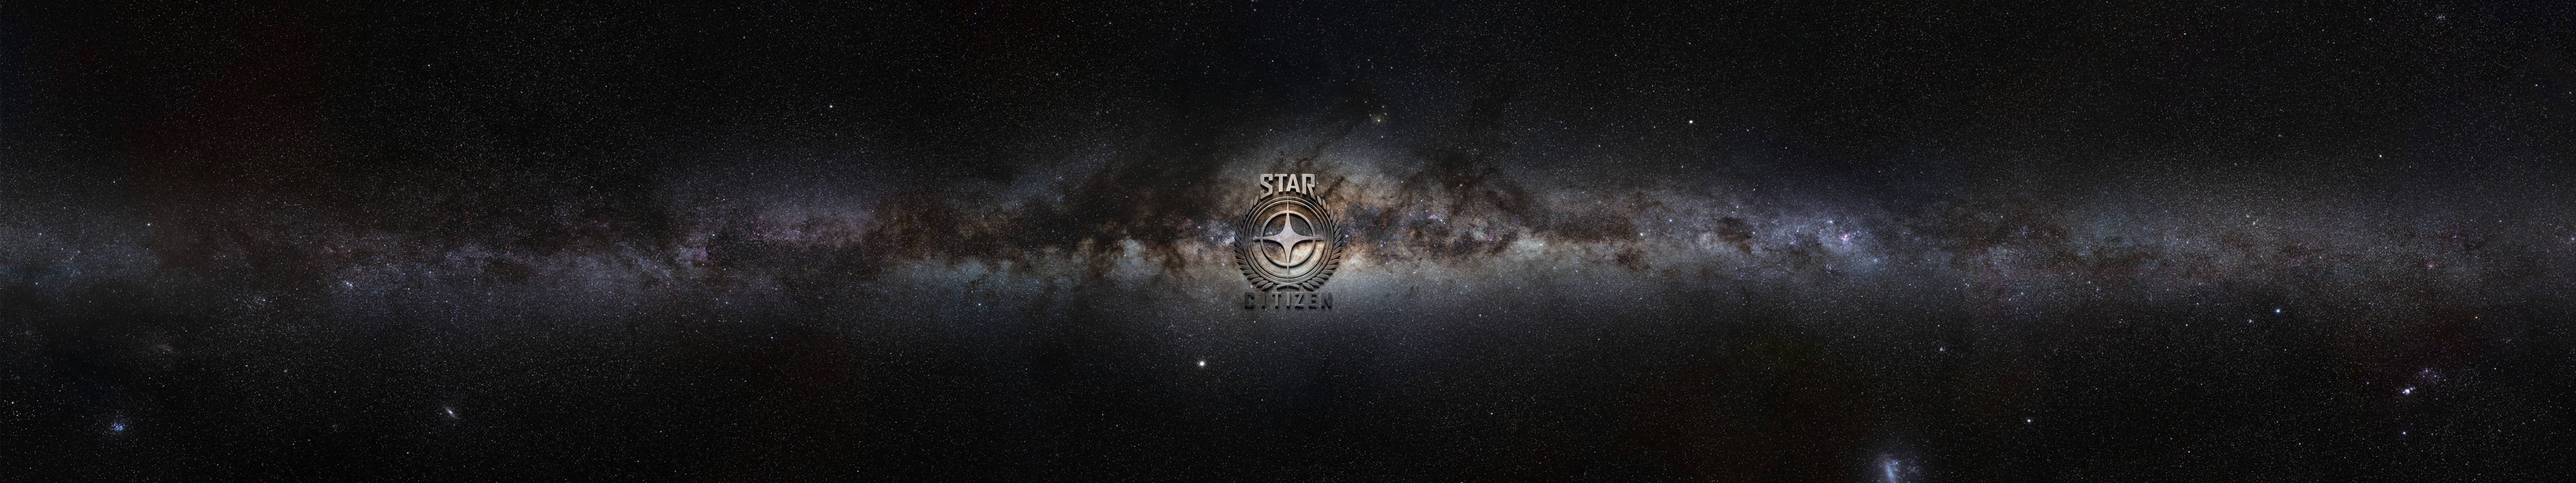 Free download Star Citizen Wallpaper For Your Computer Picture [11520x2160] for your Desktop, Mobile & Tablet. Explore 11520 x 2160 Wallpaper x 1200 Wallpaper, 5760 x 2160 Wallpaper, 5760 x 1080 Triple Monitor Wallpaper